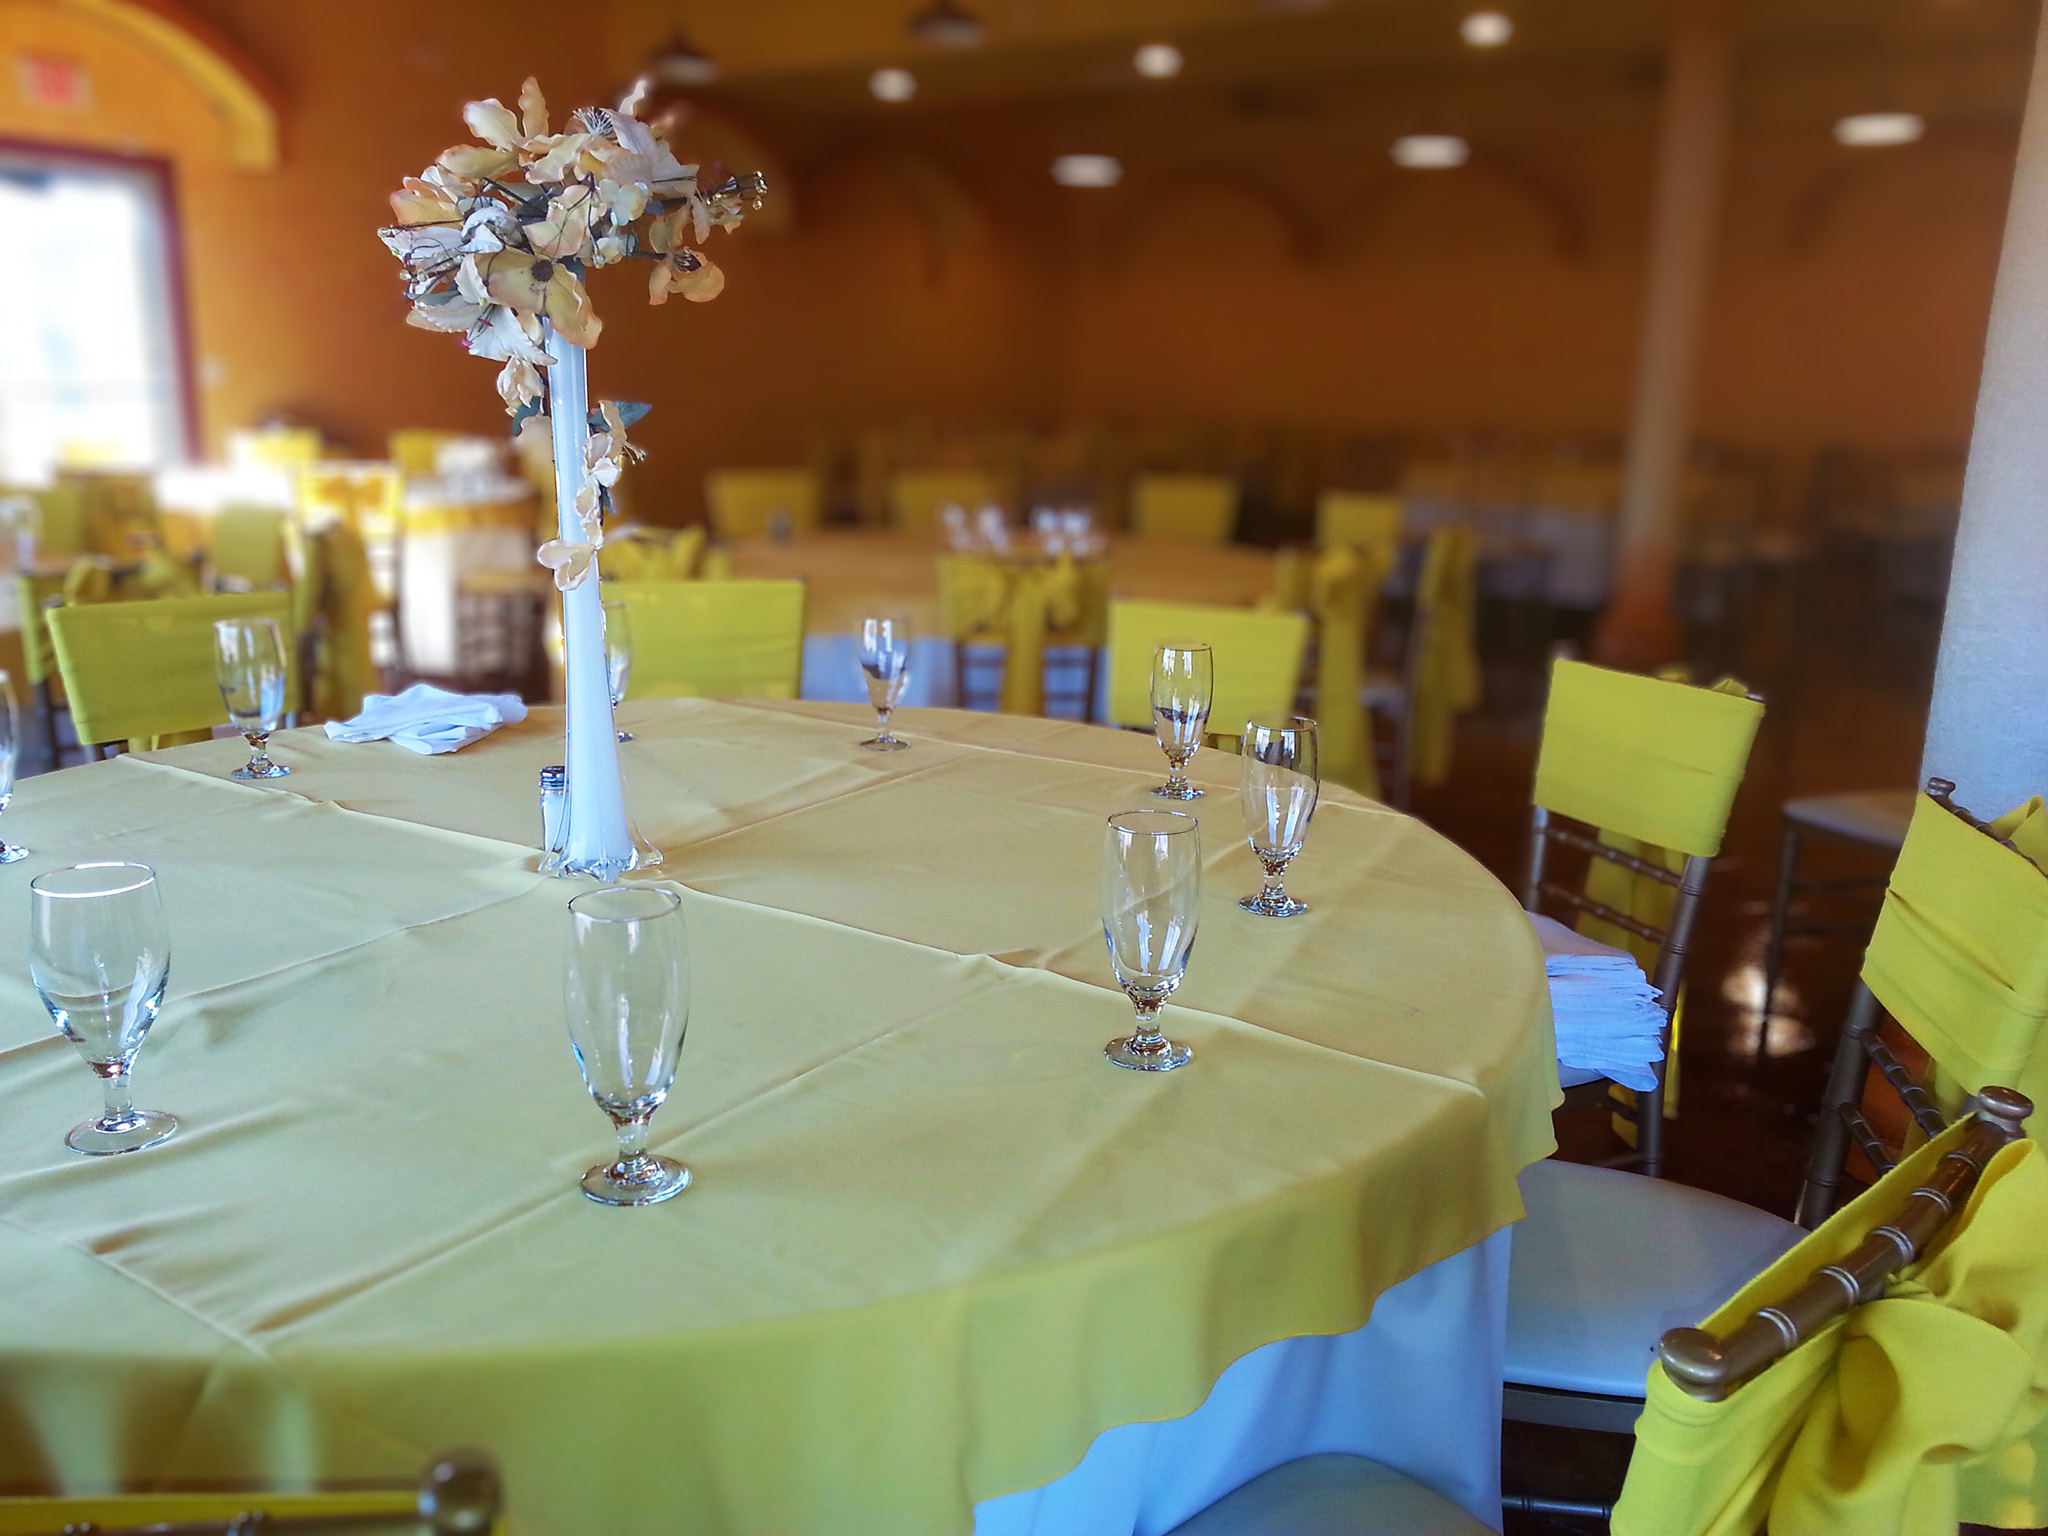 Several yellow tables